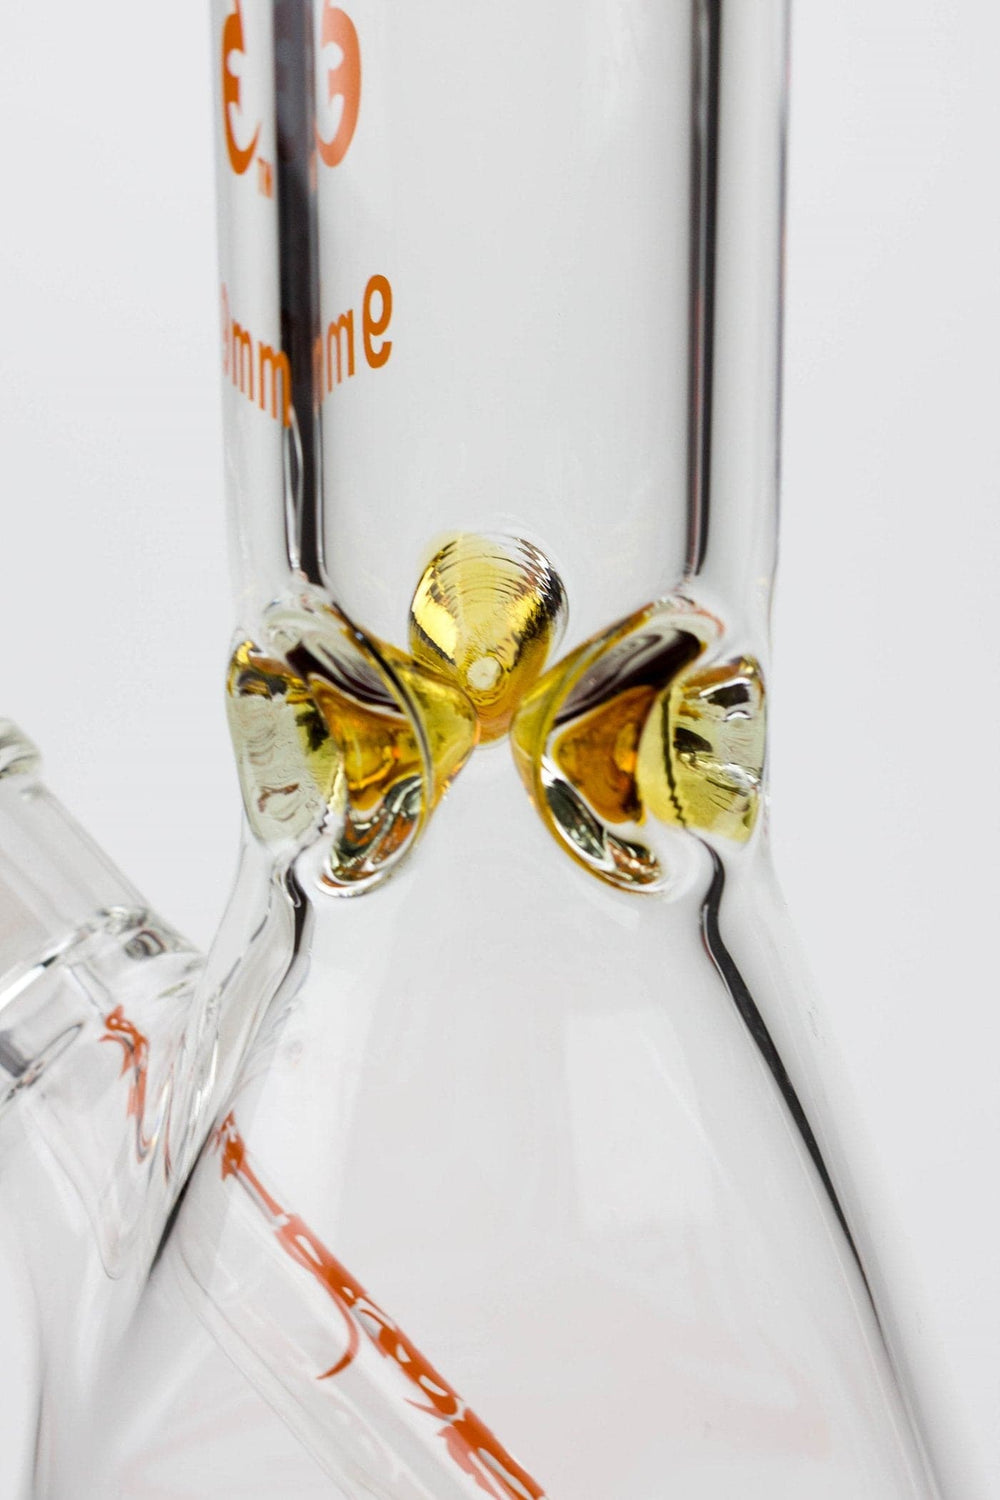 Xtreme glass classic glass beaker water pipes_1